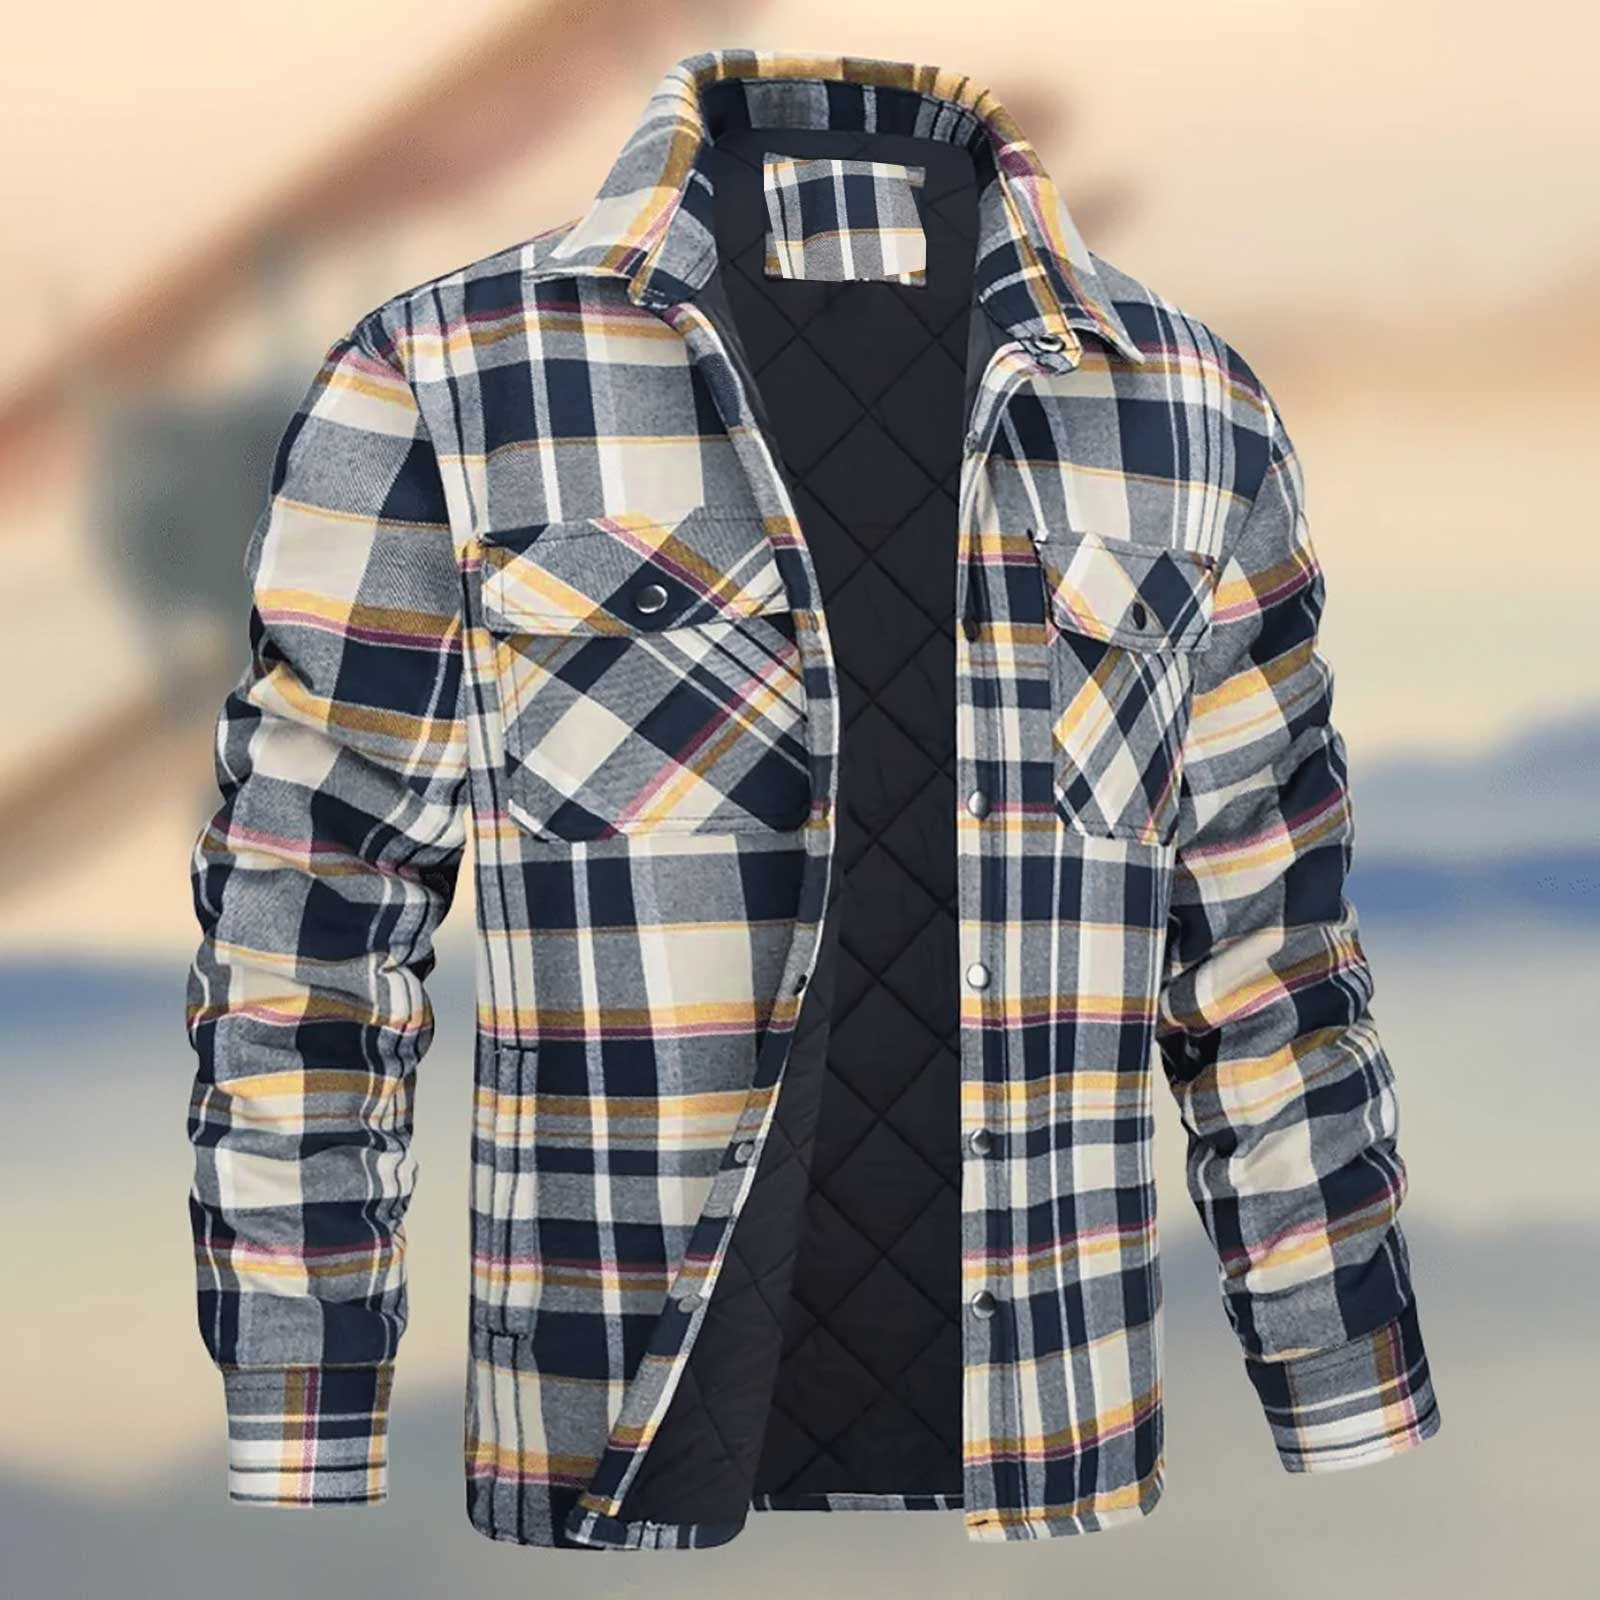 Brnmxoke Men's Lined Hooded Flannel Shirt Jacket with Pockets Plus Size  Quilted Plaid Coat Button Down Plaid Button Up Winter Thermal Warm Jackets  